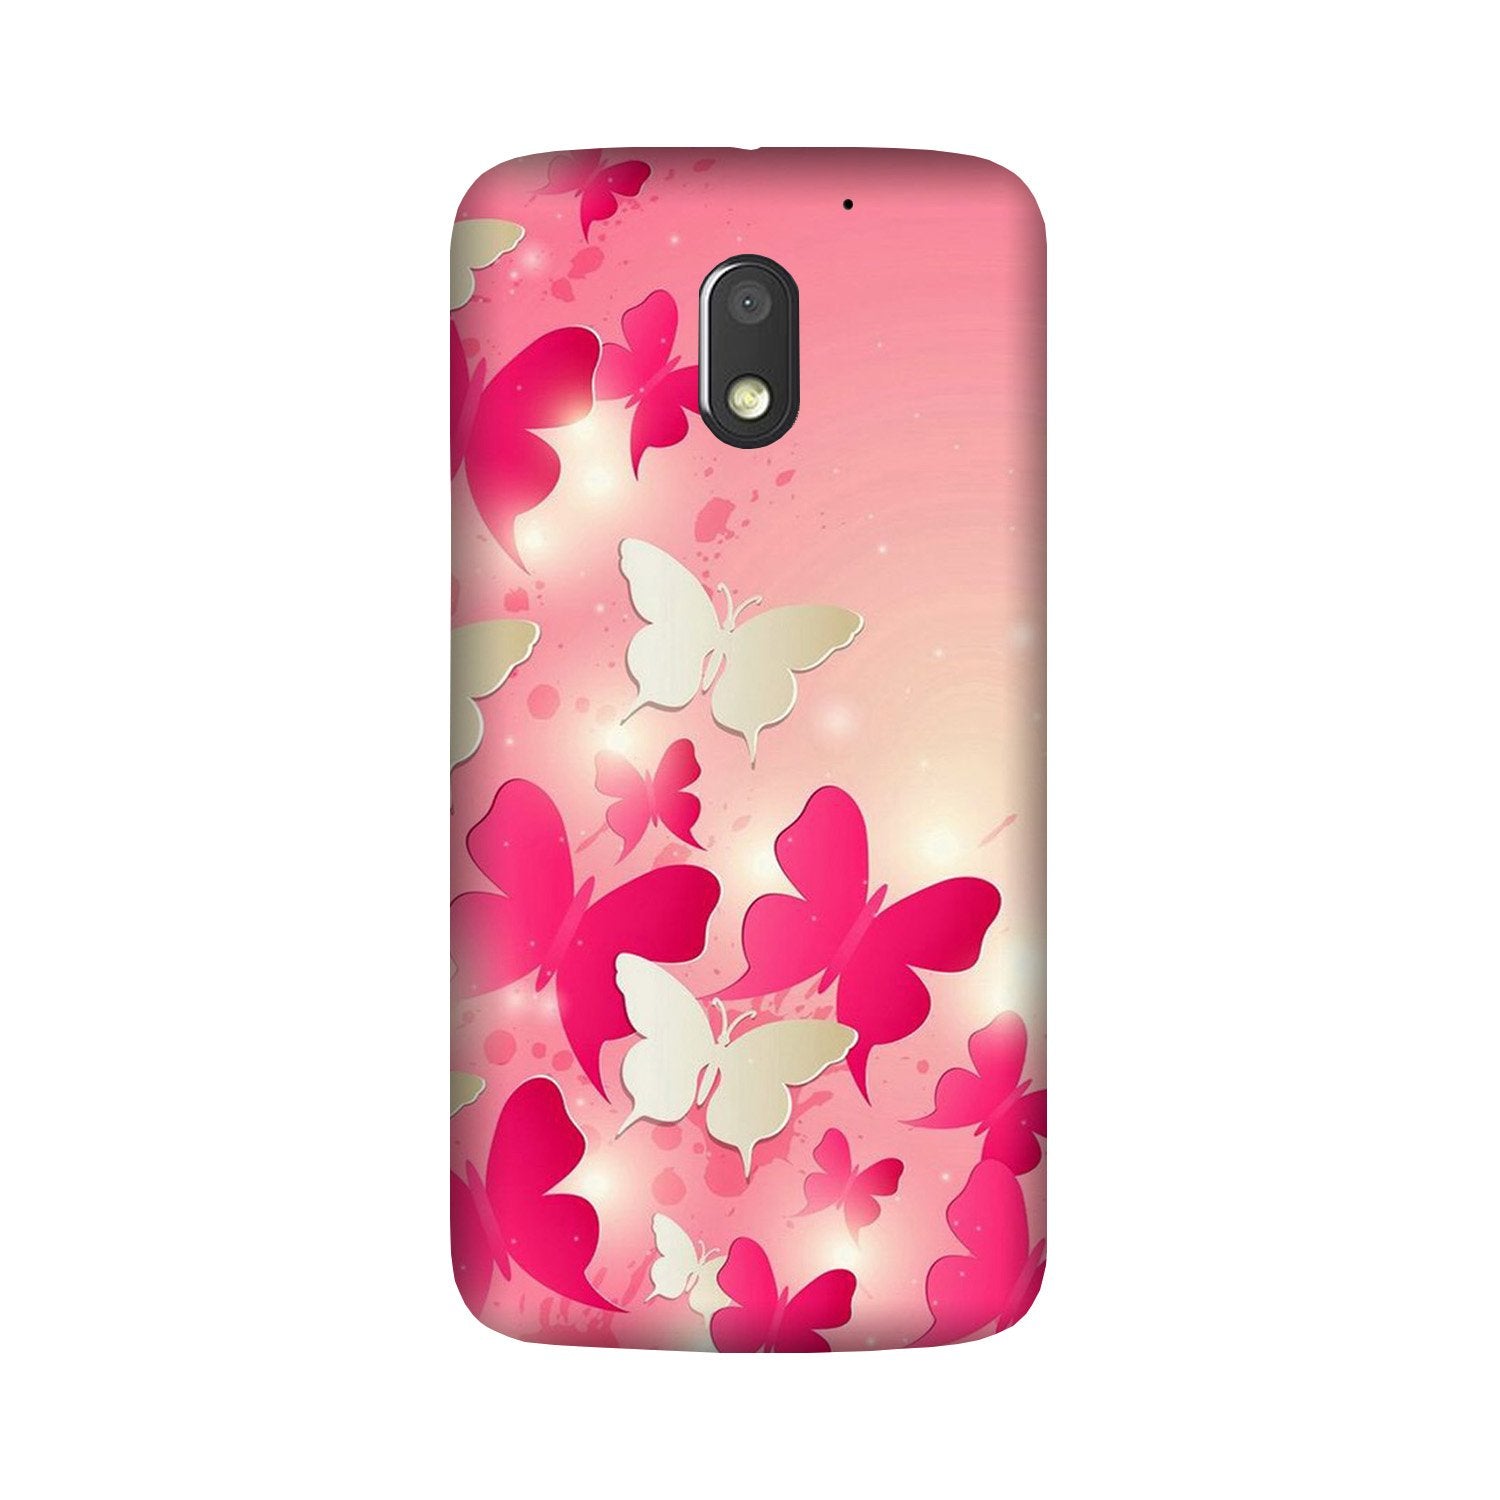 White Pick Butterflies Case for Moto G4 Play